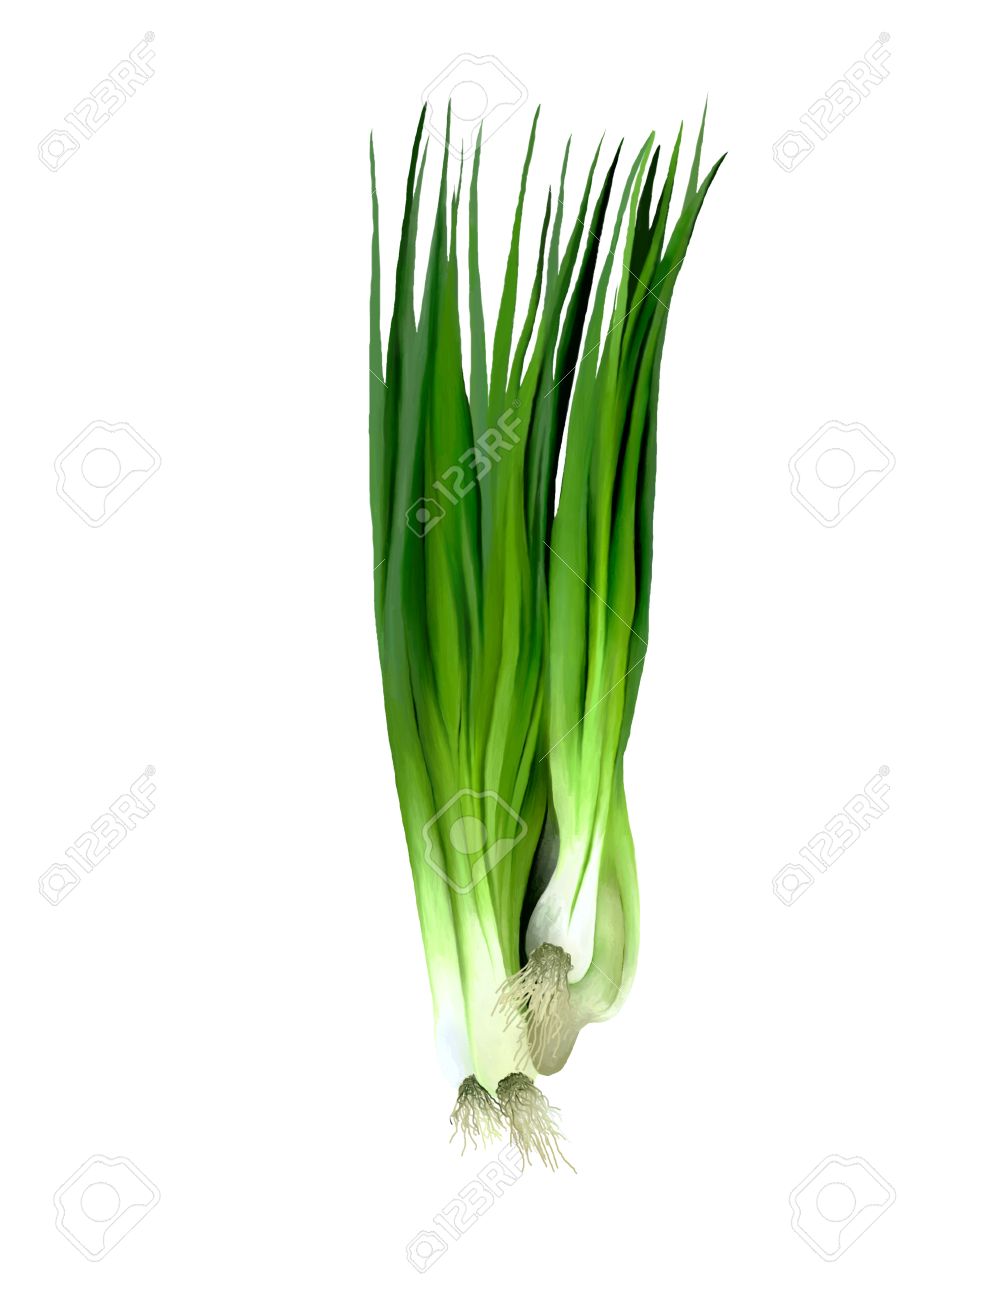 spring onion clipart - photo #21